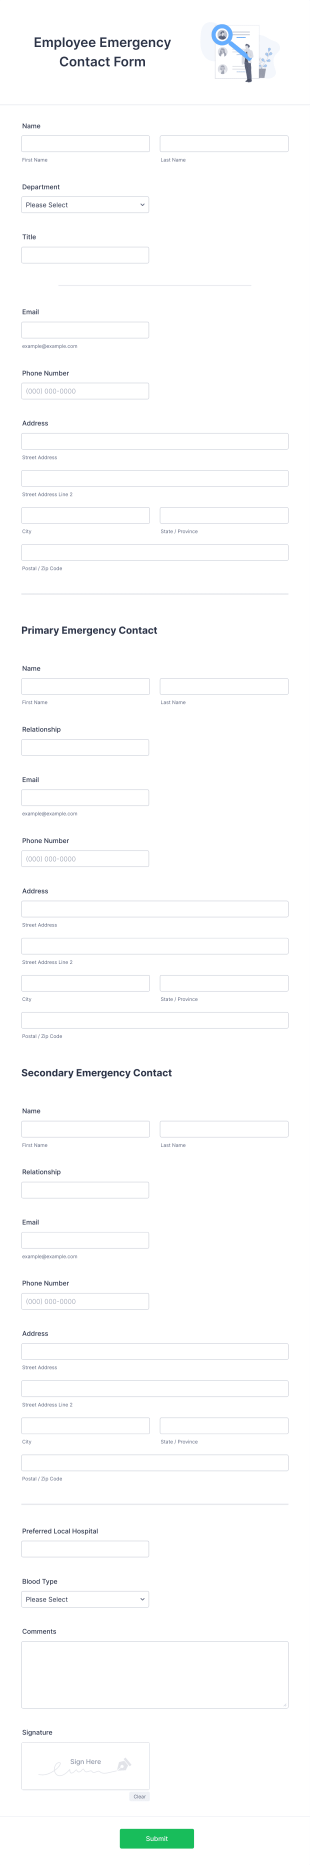 Employee Emergency Contact List Form Template